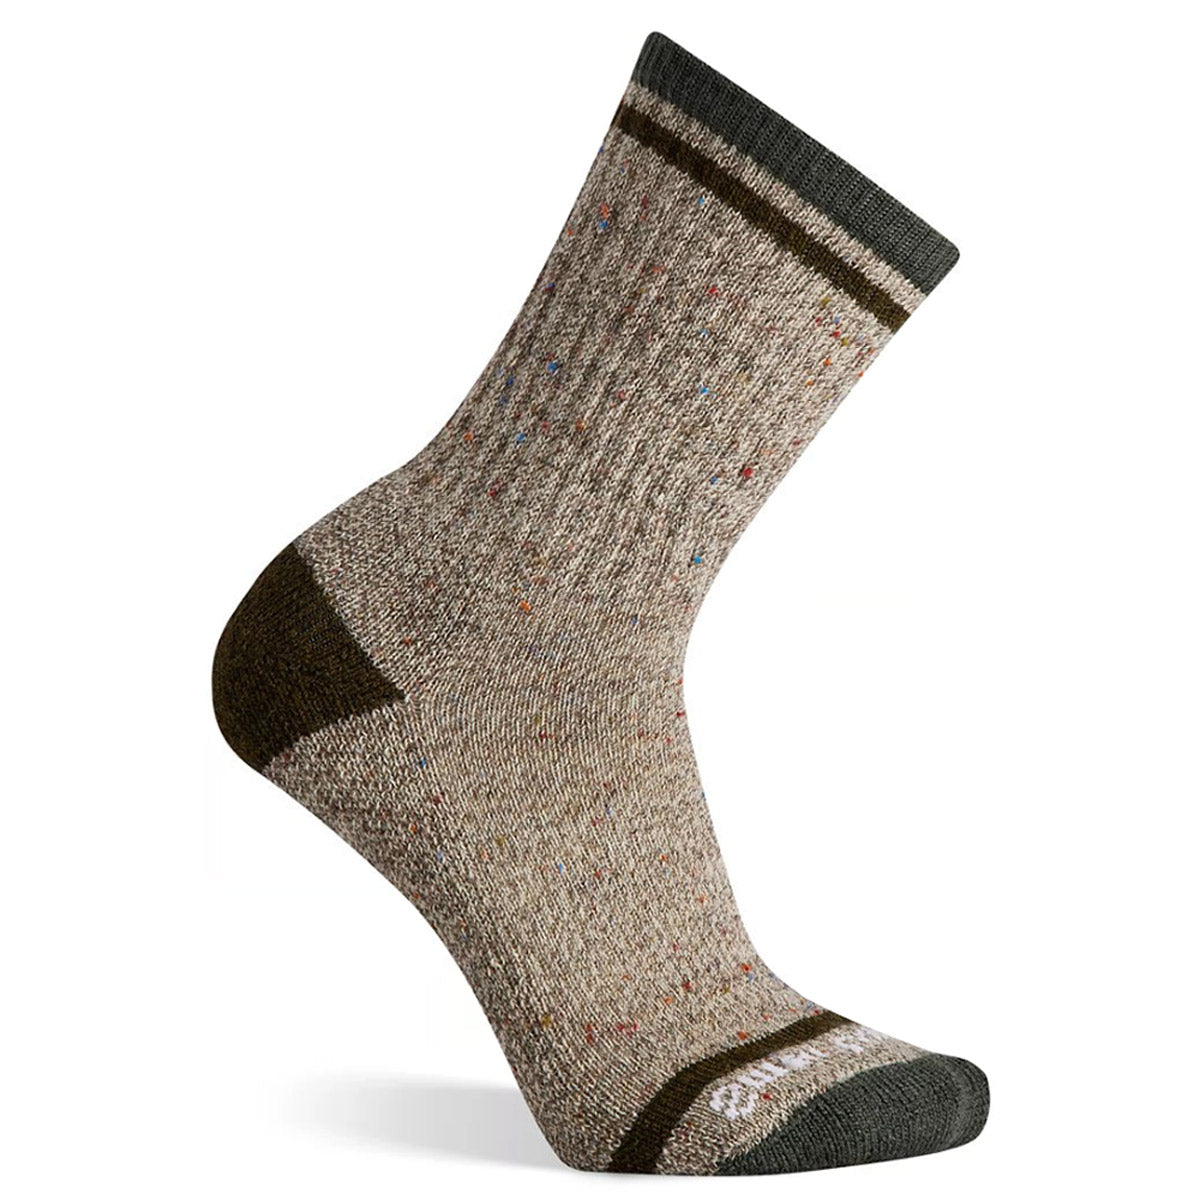 A single beige SMARTWOOL LARIMER SOCKS DARK SAGE - MENS with a dark green toe, heel, and cuff, featuring a subtle multi-colored speckled pattern from Smartwool.